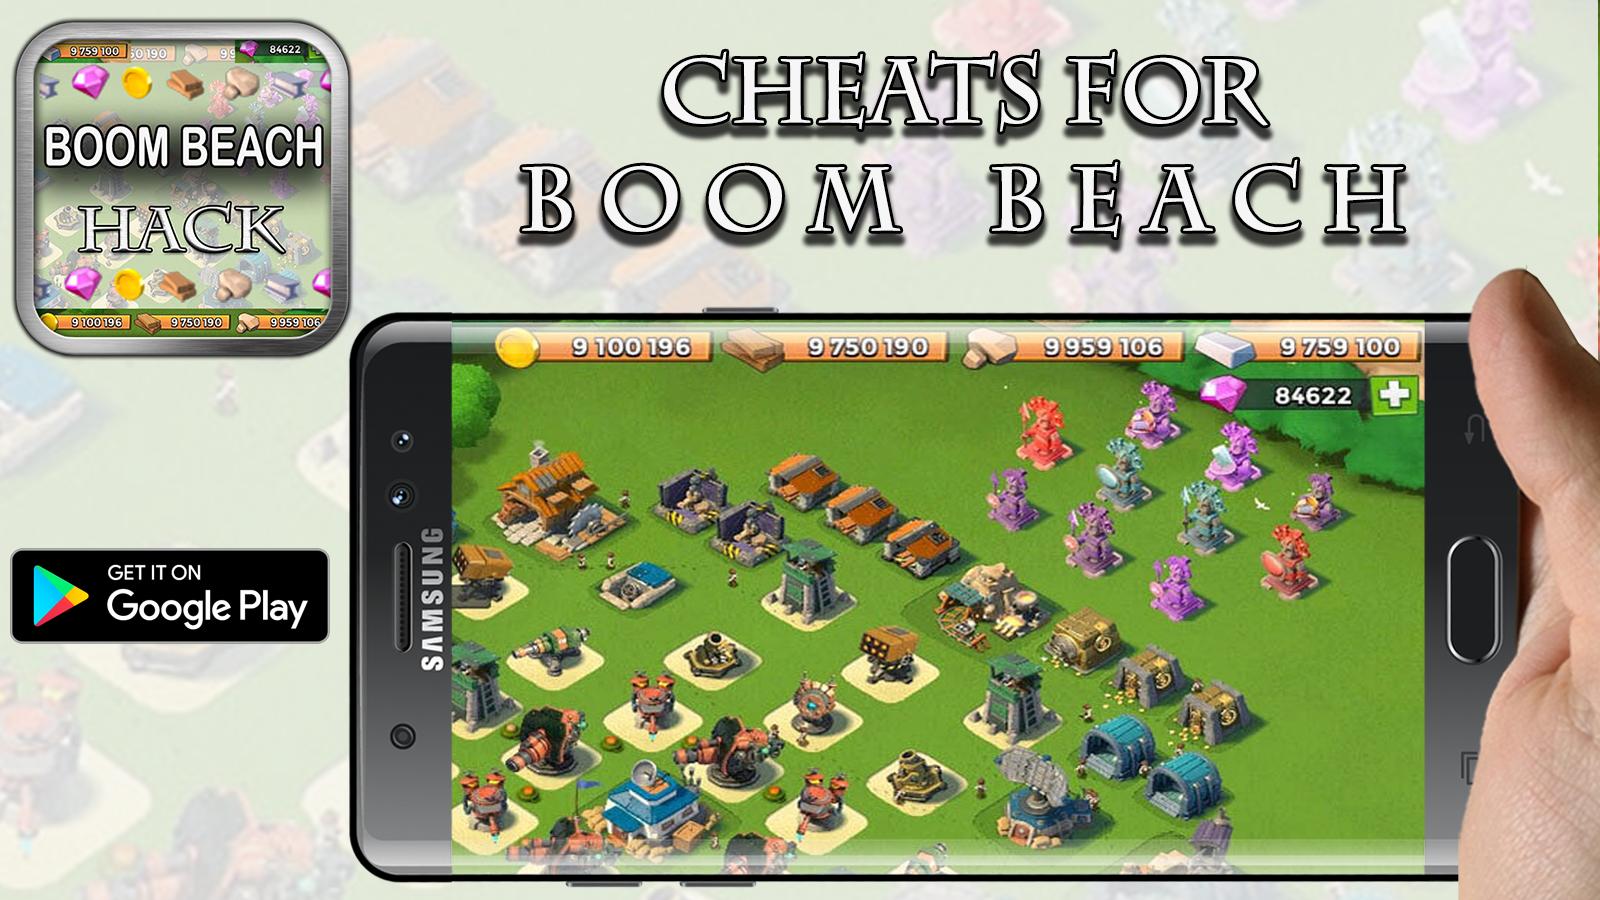 Hack For Boom Beach 2017 Prank For Android Apk Download - roblox btools hack 2017 download